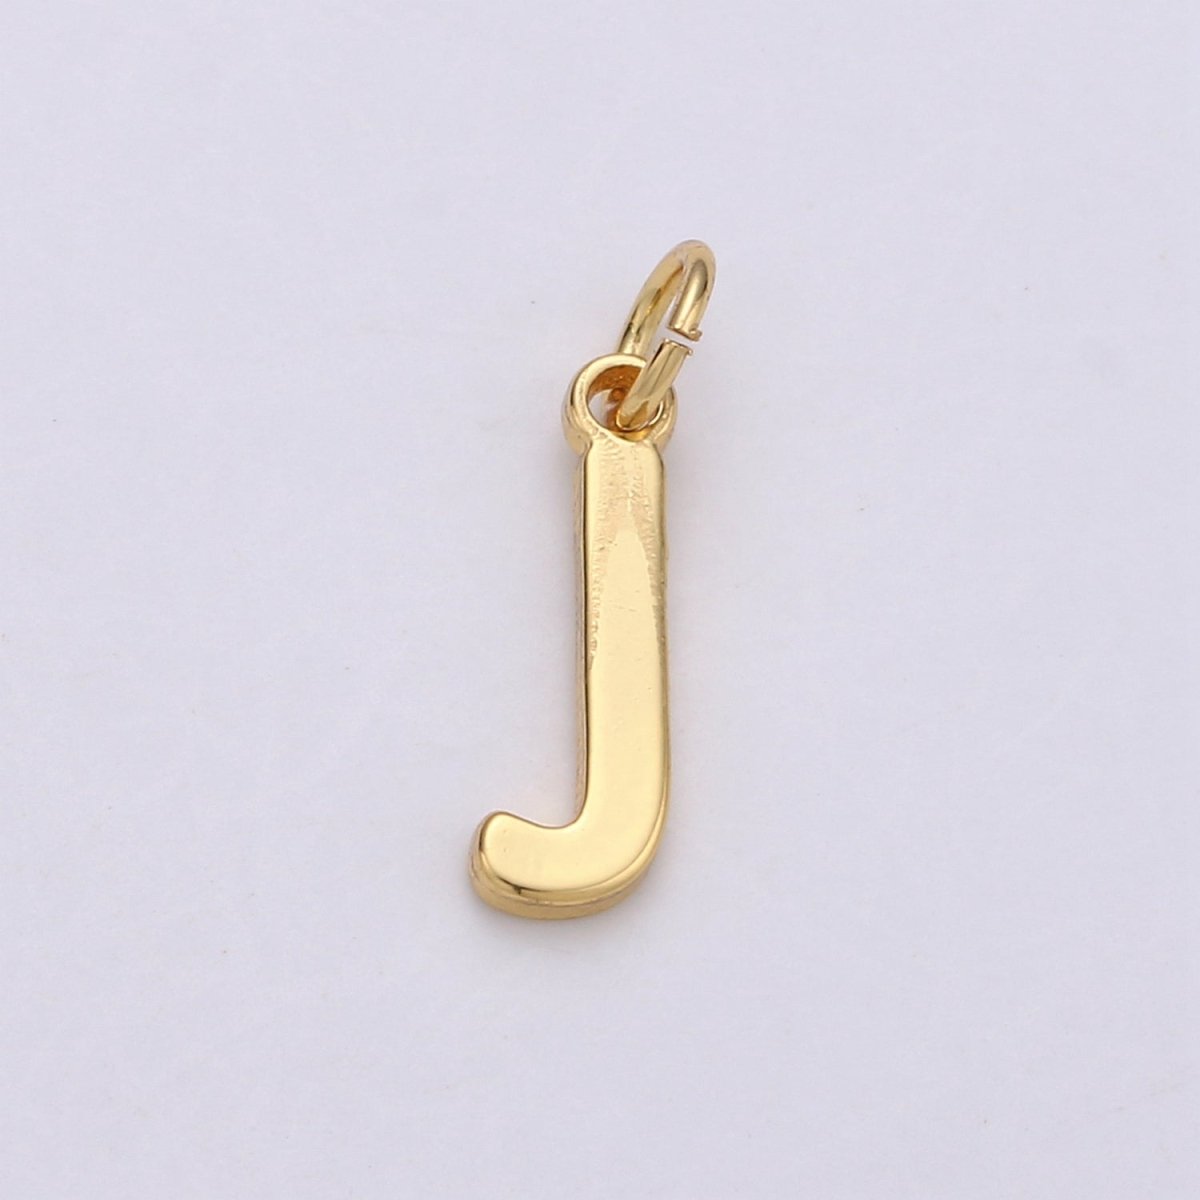 14k Gold Filled Personalized Initial Charm Initial Pendant, Letter Charm, Minimalist Alphabet Letter Charm, Monogram Charm Add On Charm A-113 to A-125 - DLUXCA